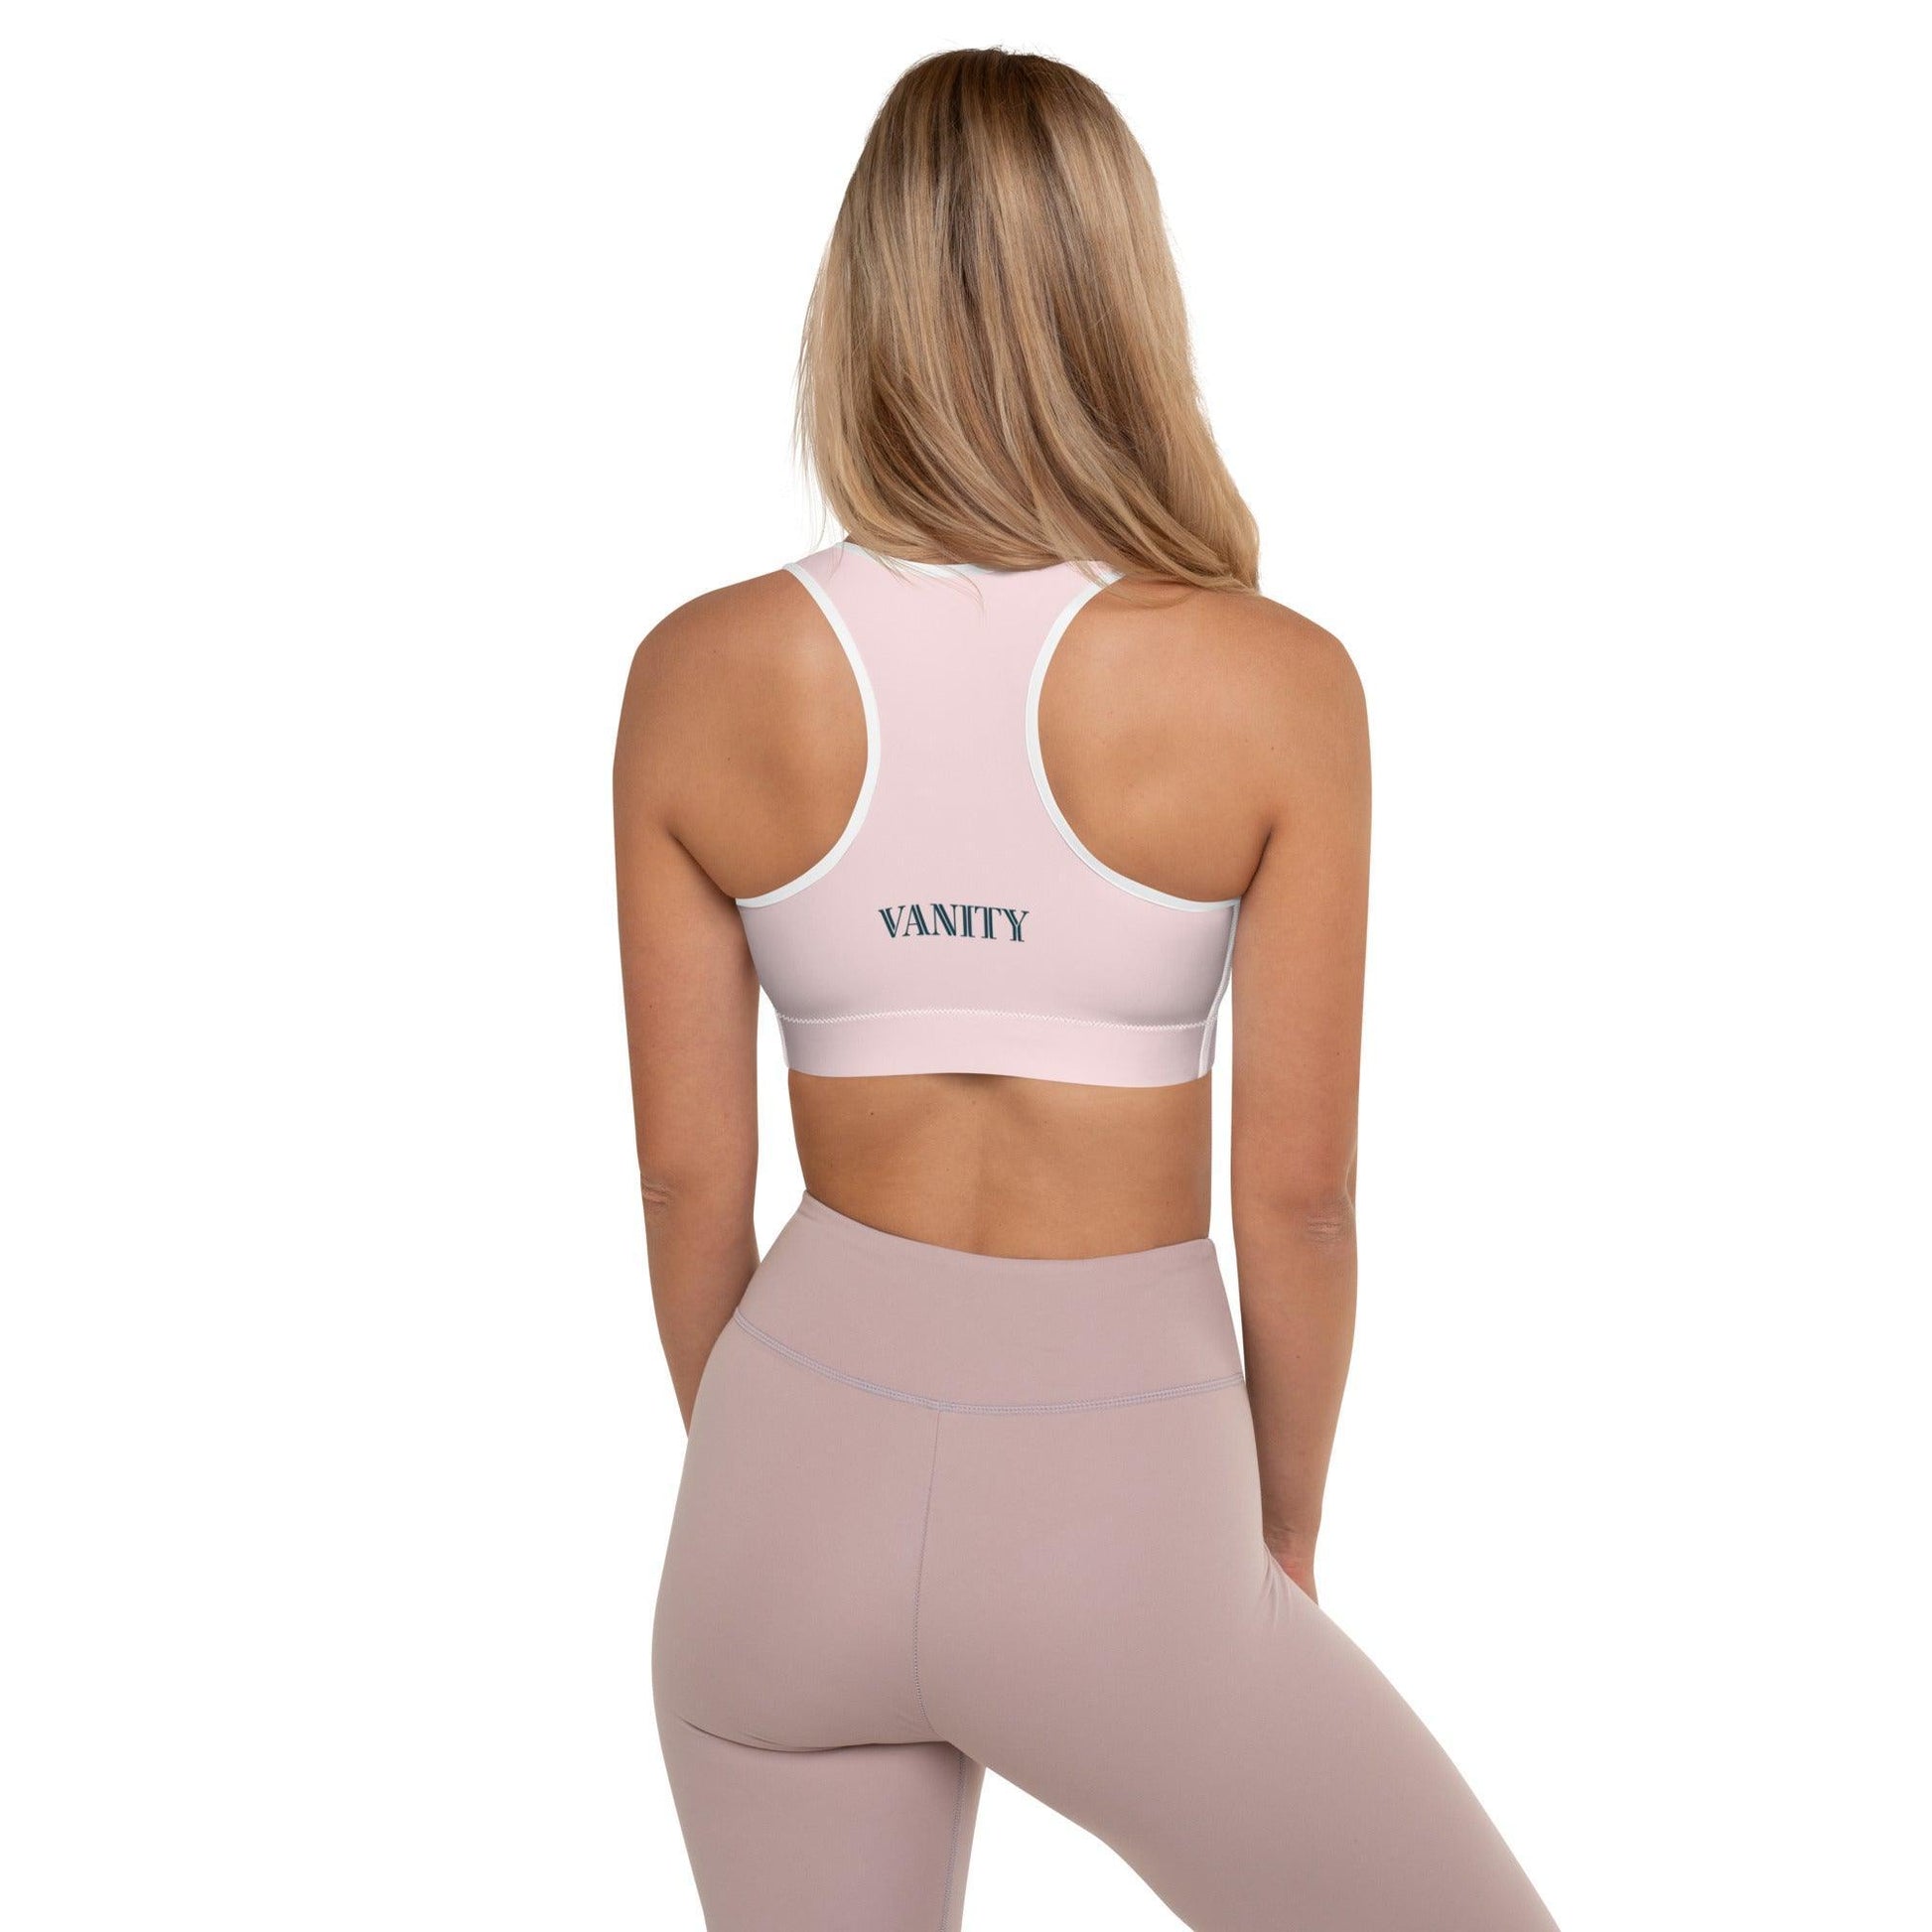 Vanity Padded Sports Bra - ForVanity tops & tees, women's sports & entertainment Sports Top